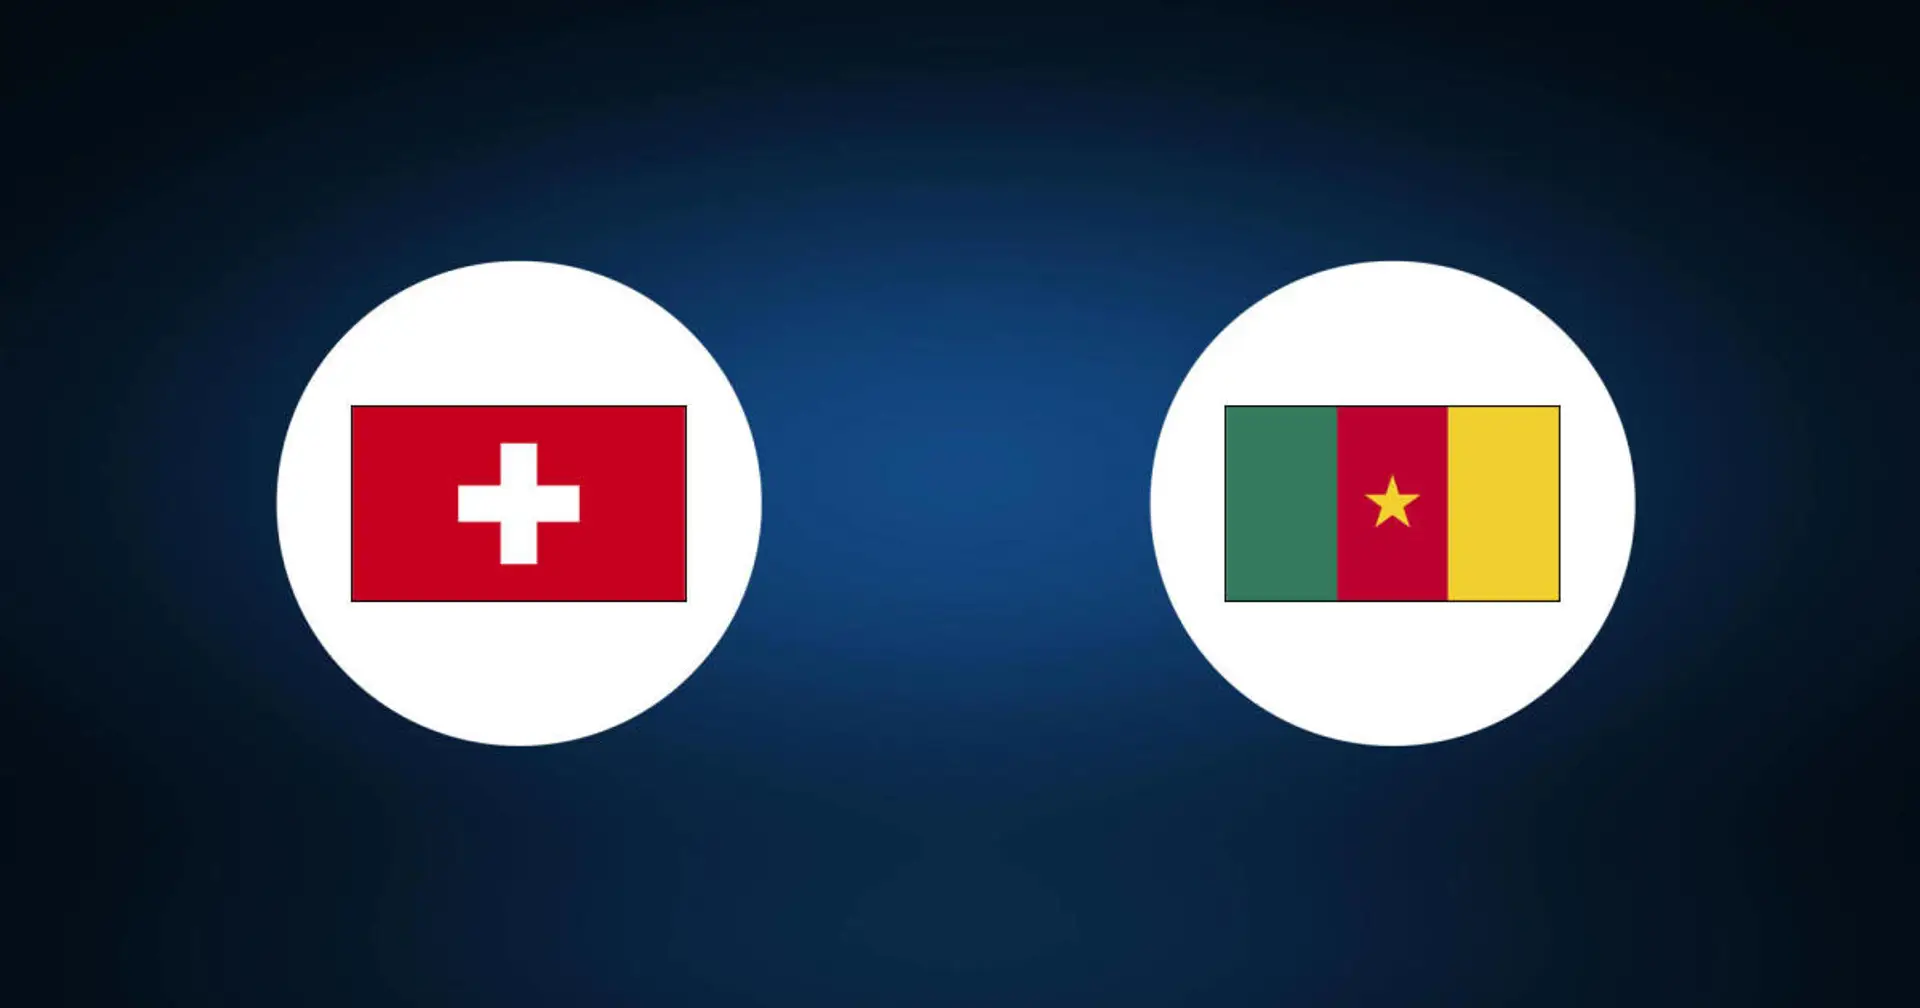 Switzerland vs Cameroon: Official team lineups for the World Cup clash revealed